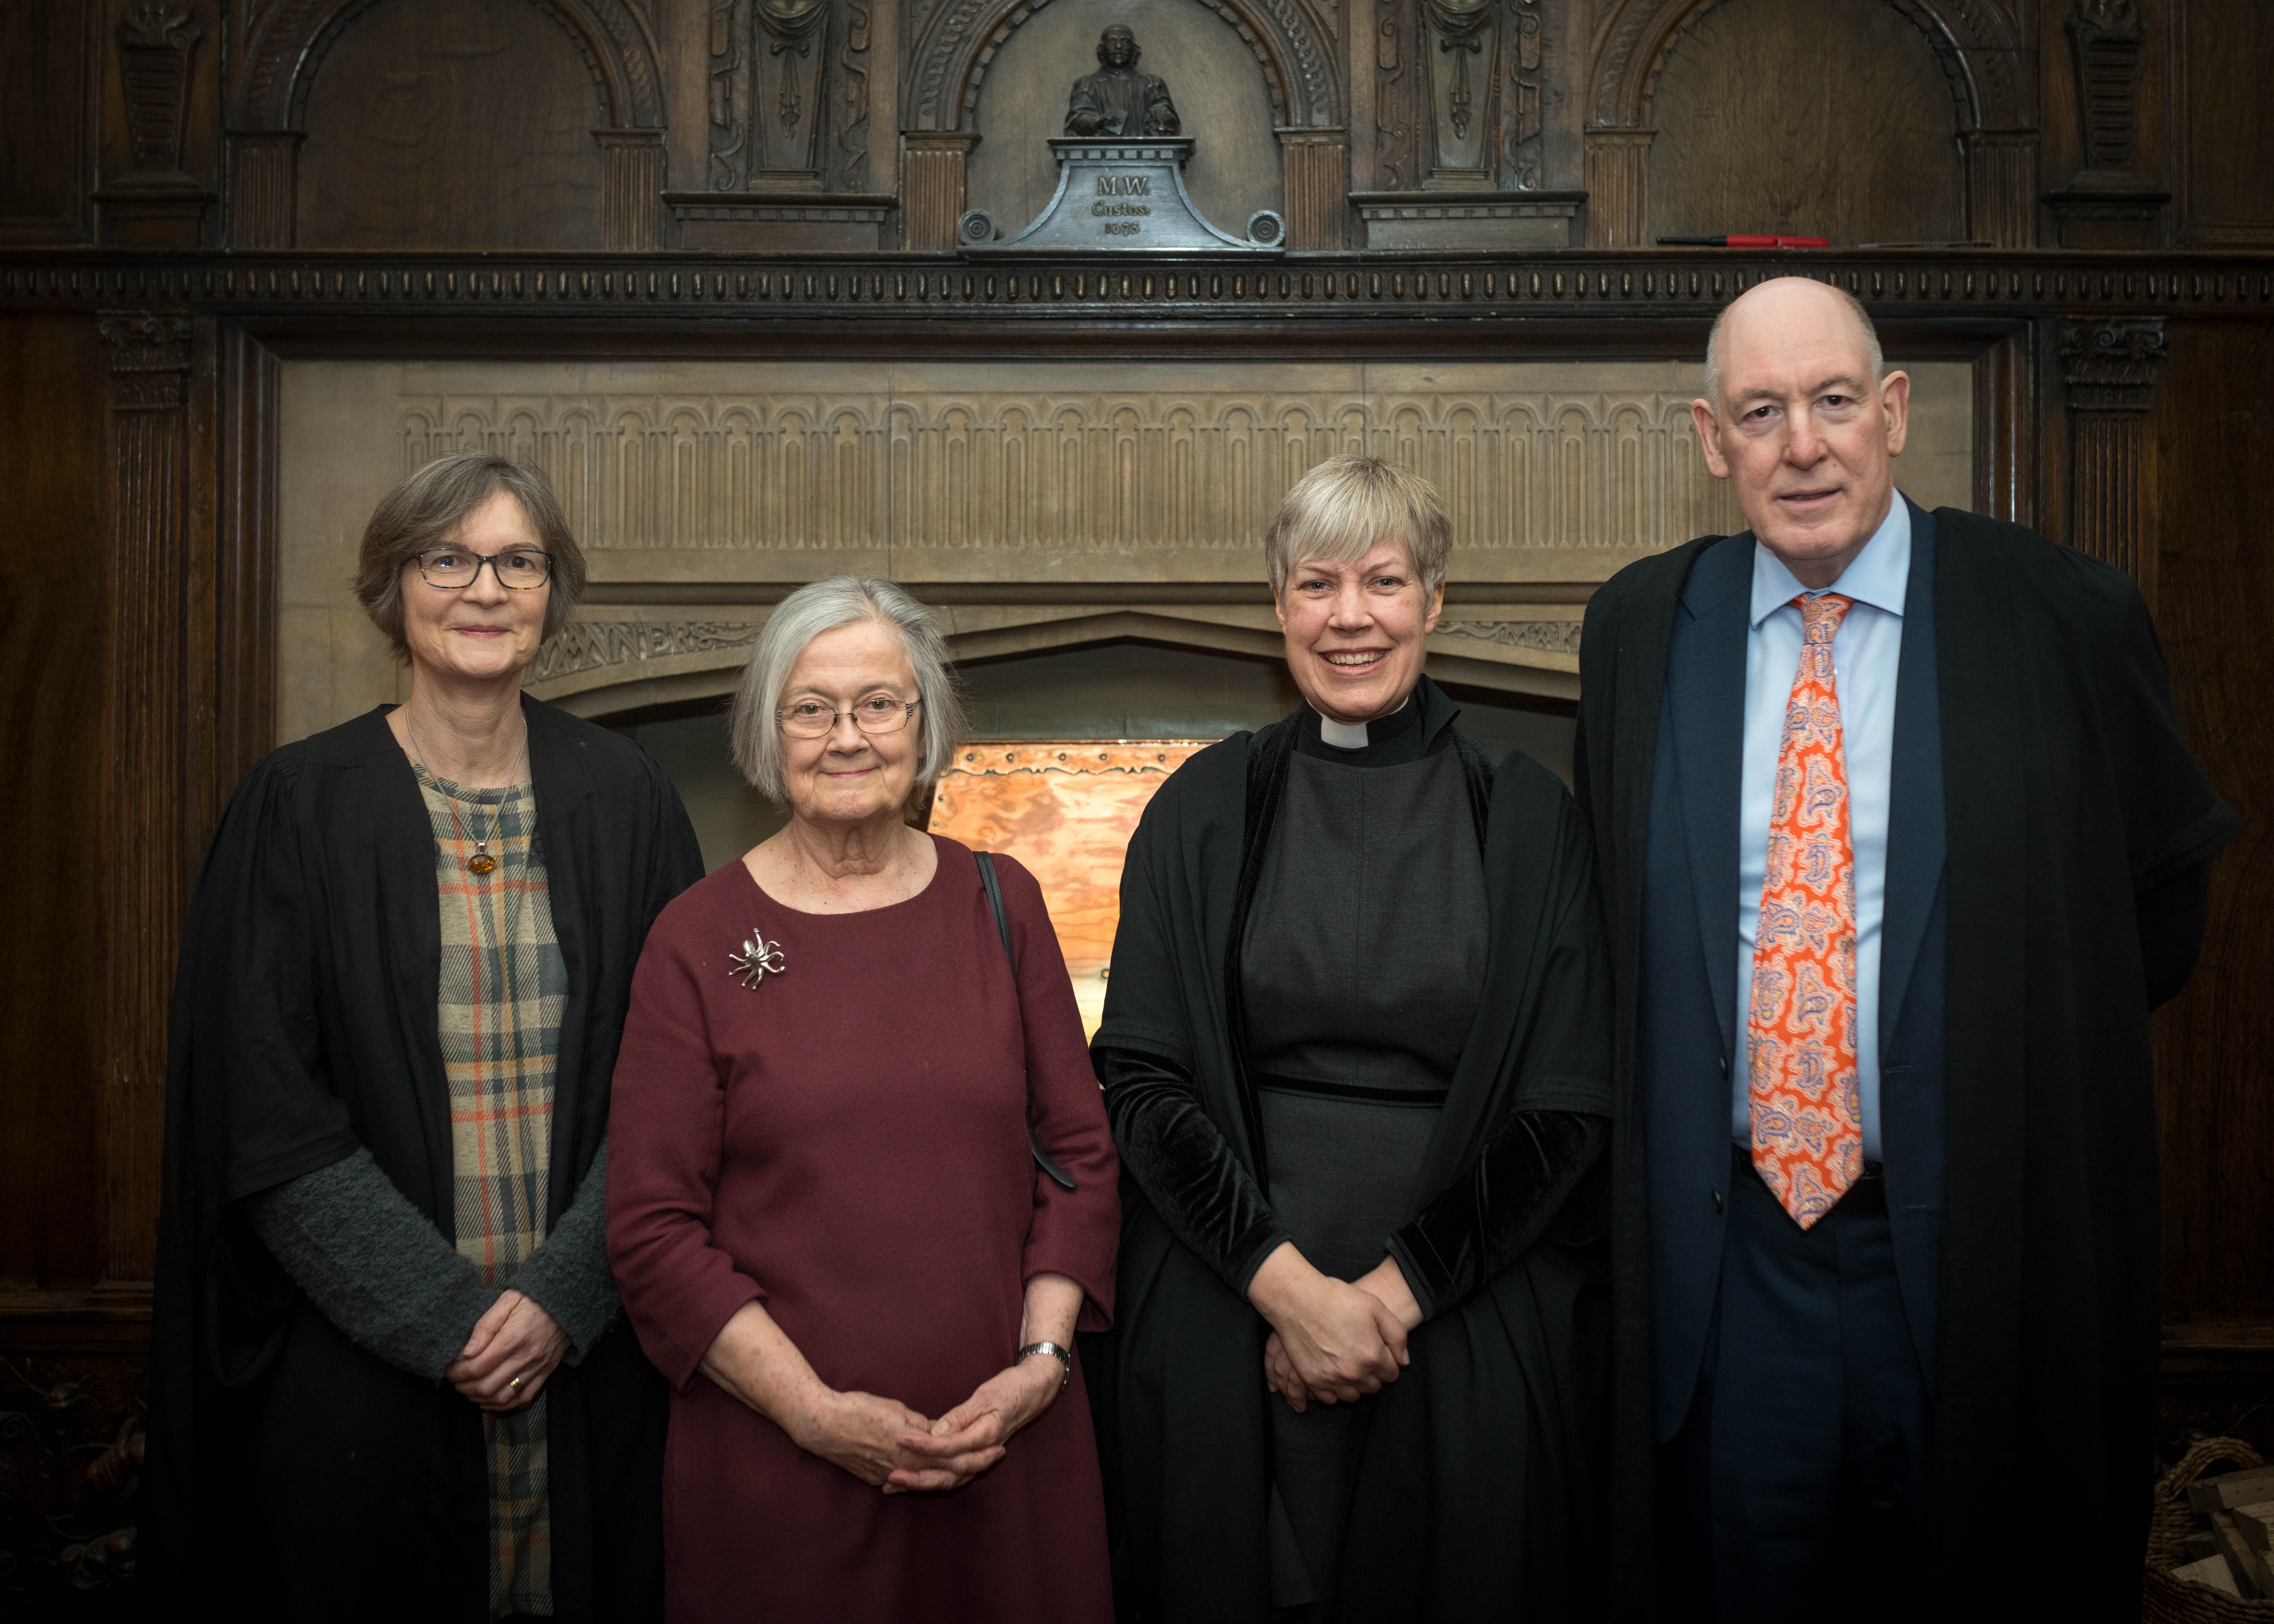 Prof Sue Bright, Baroness Hale, the Dean of Divinity, and the Warden